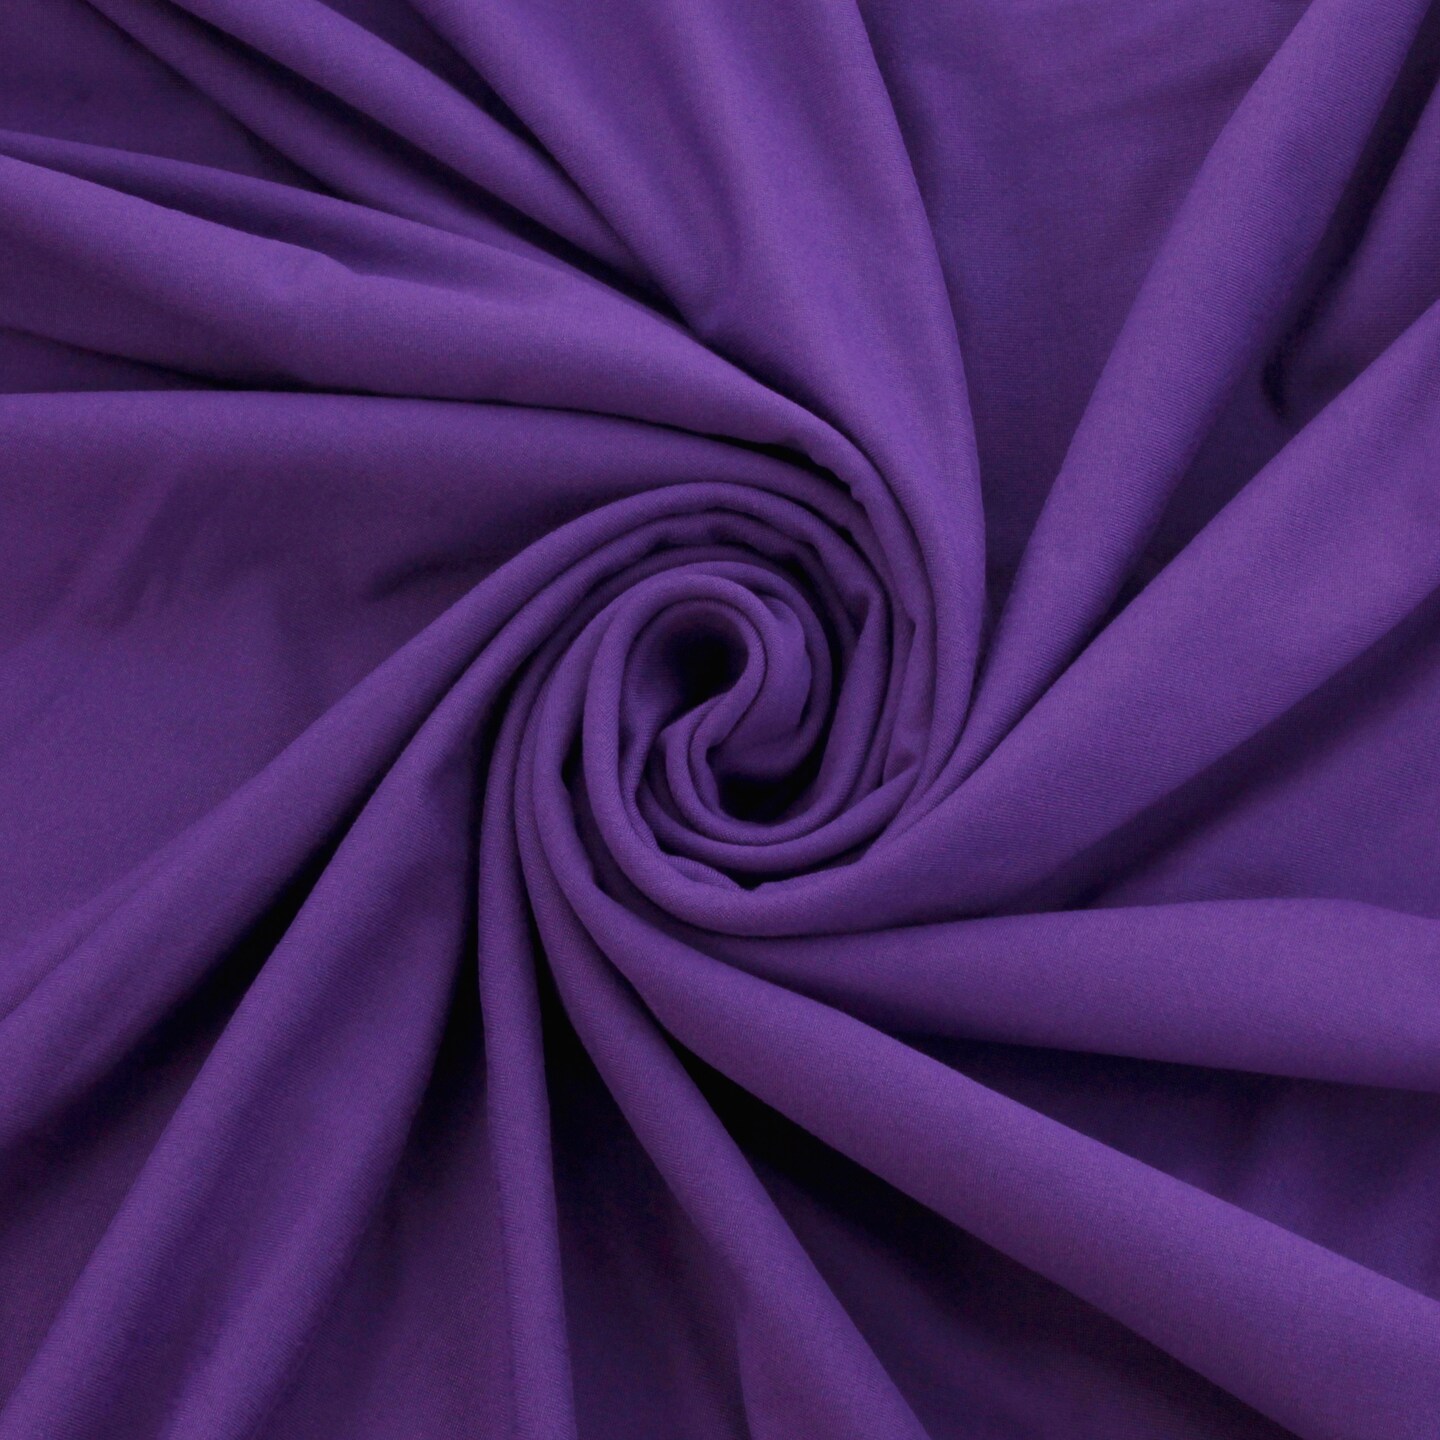 Solid DBP Fabric - Double Brushed Polyester - Purple - 1yd | Michaels